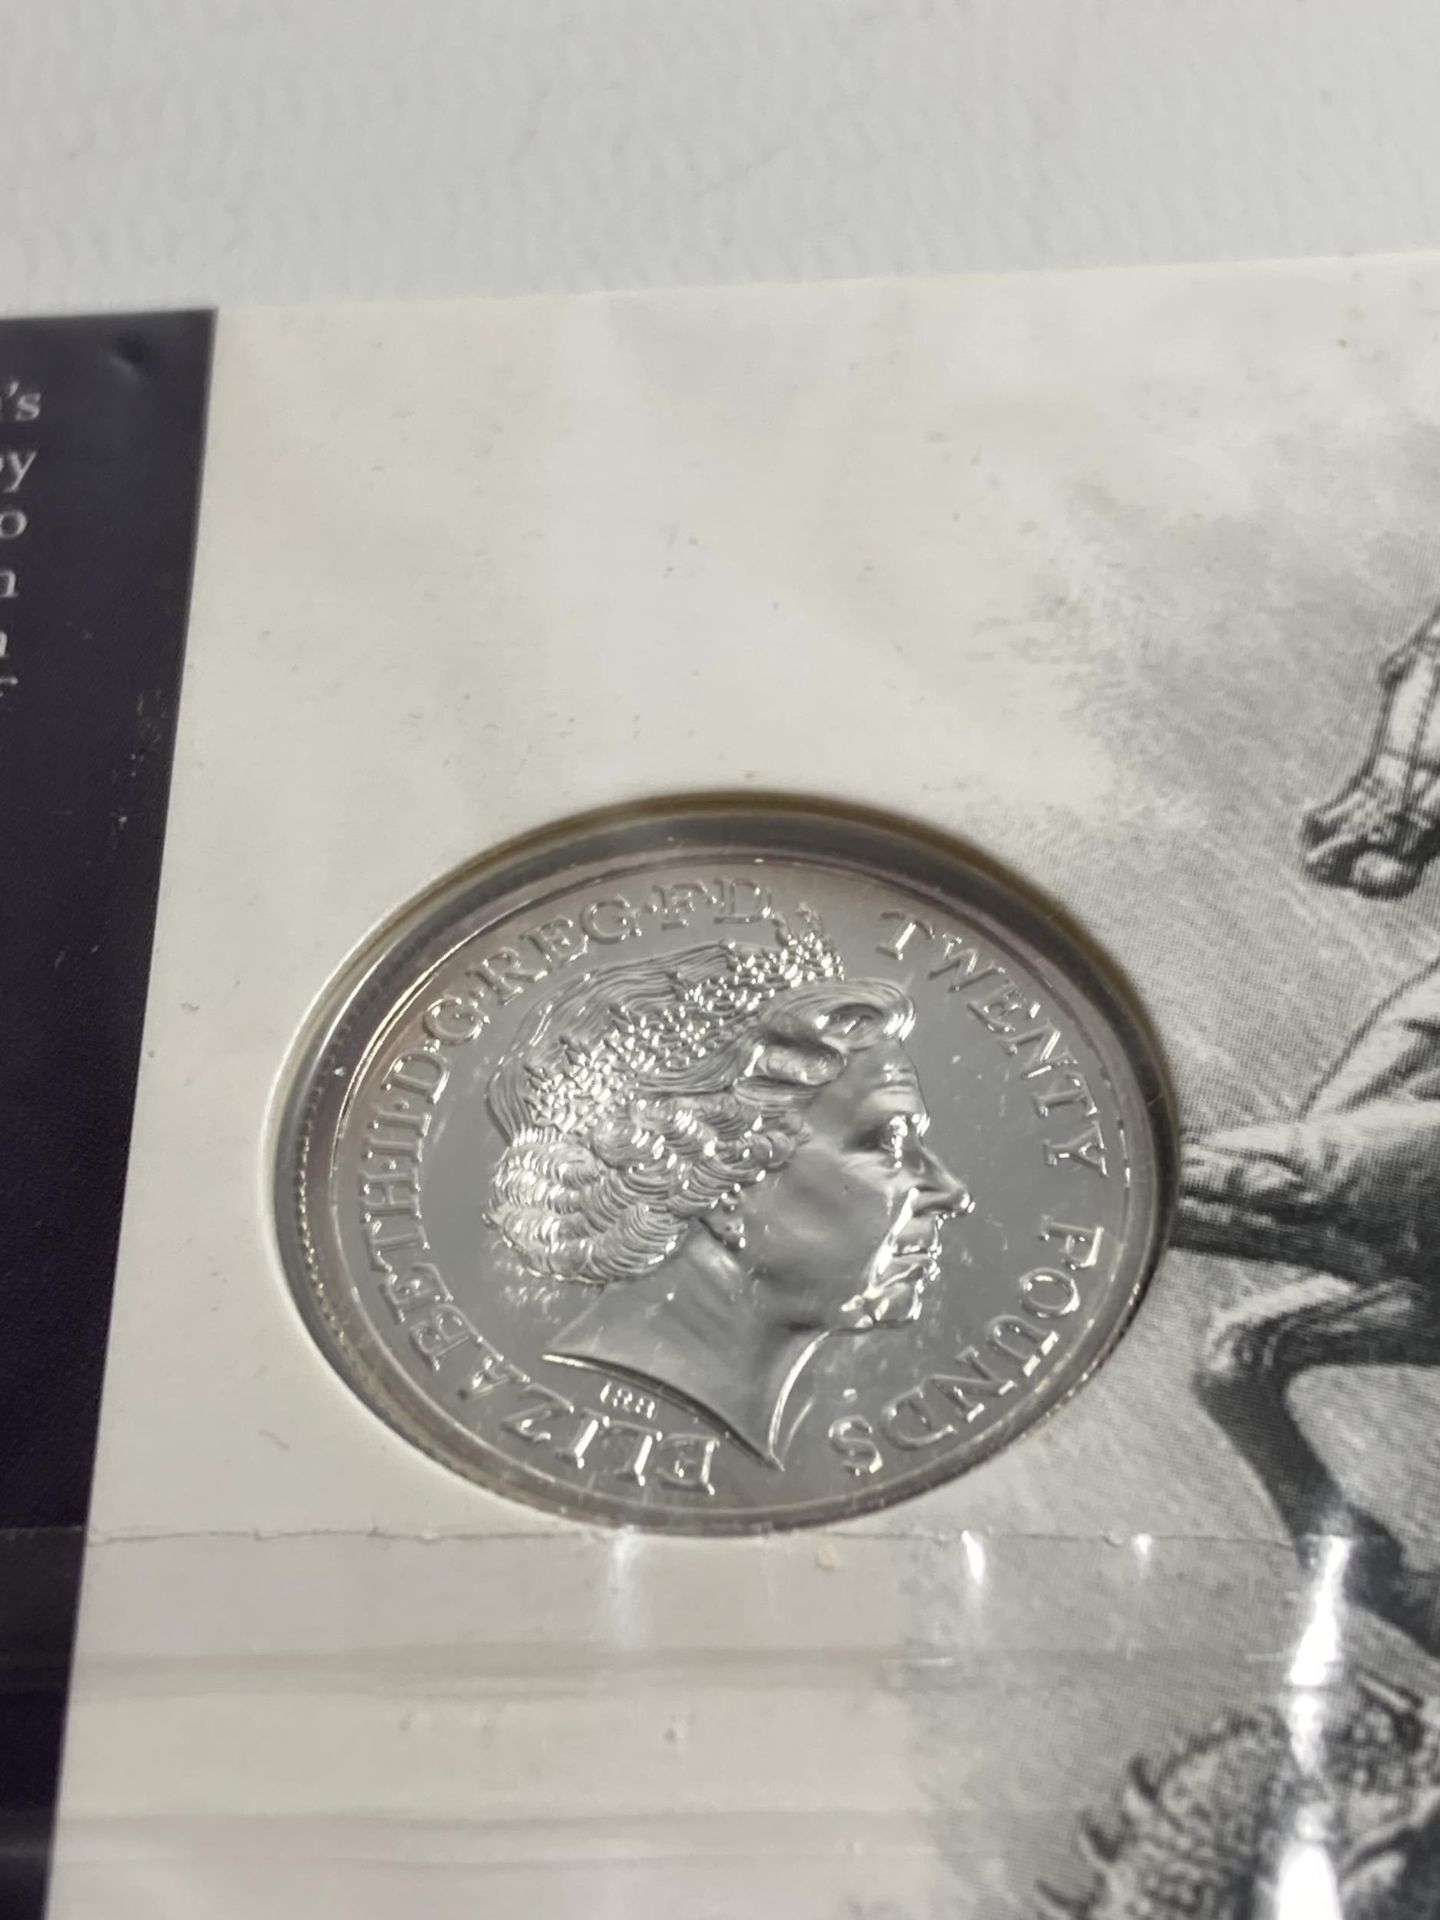 A ROYAL MINT GEORGE AND THE DRAGON 2013 UK £20 FINE SILVER COIN - Bild 3 aus 3